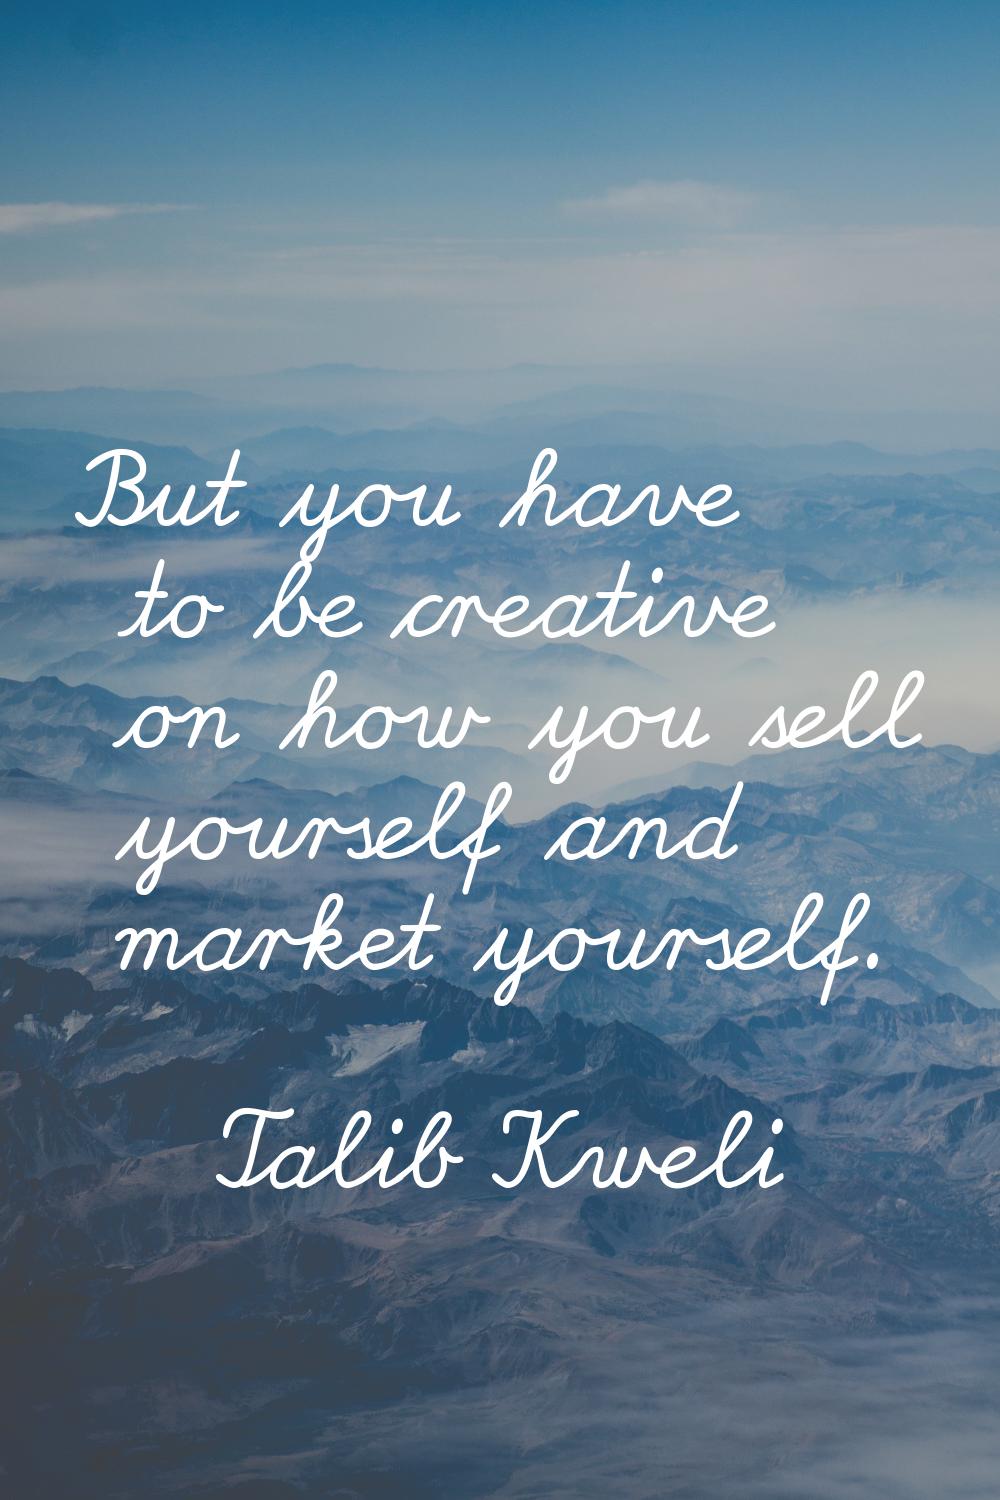 But you have to be creative on how you sell yourself and market yourself.